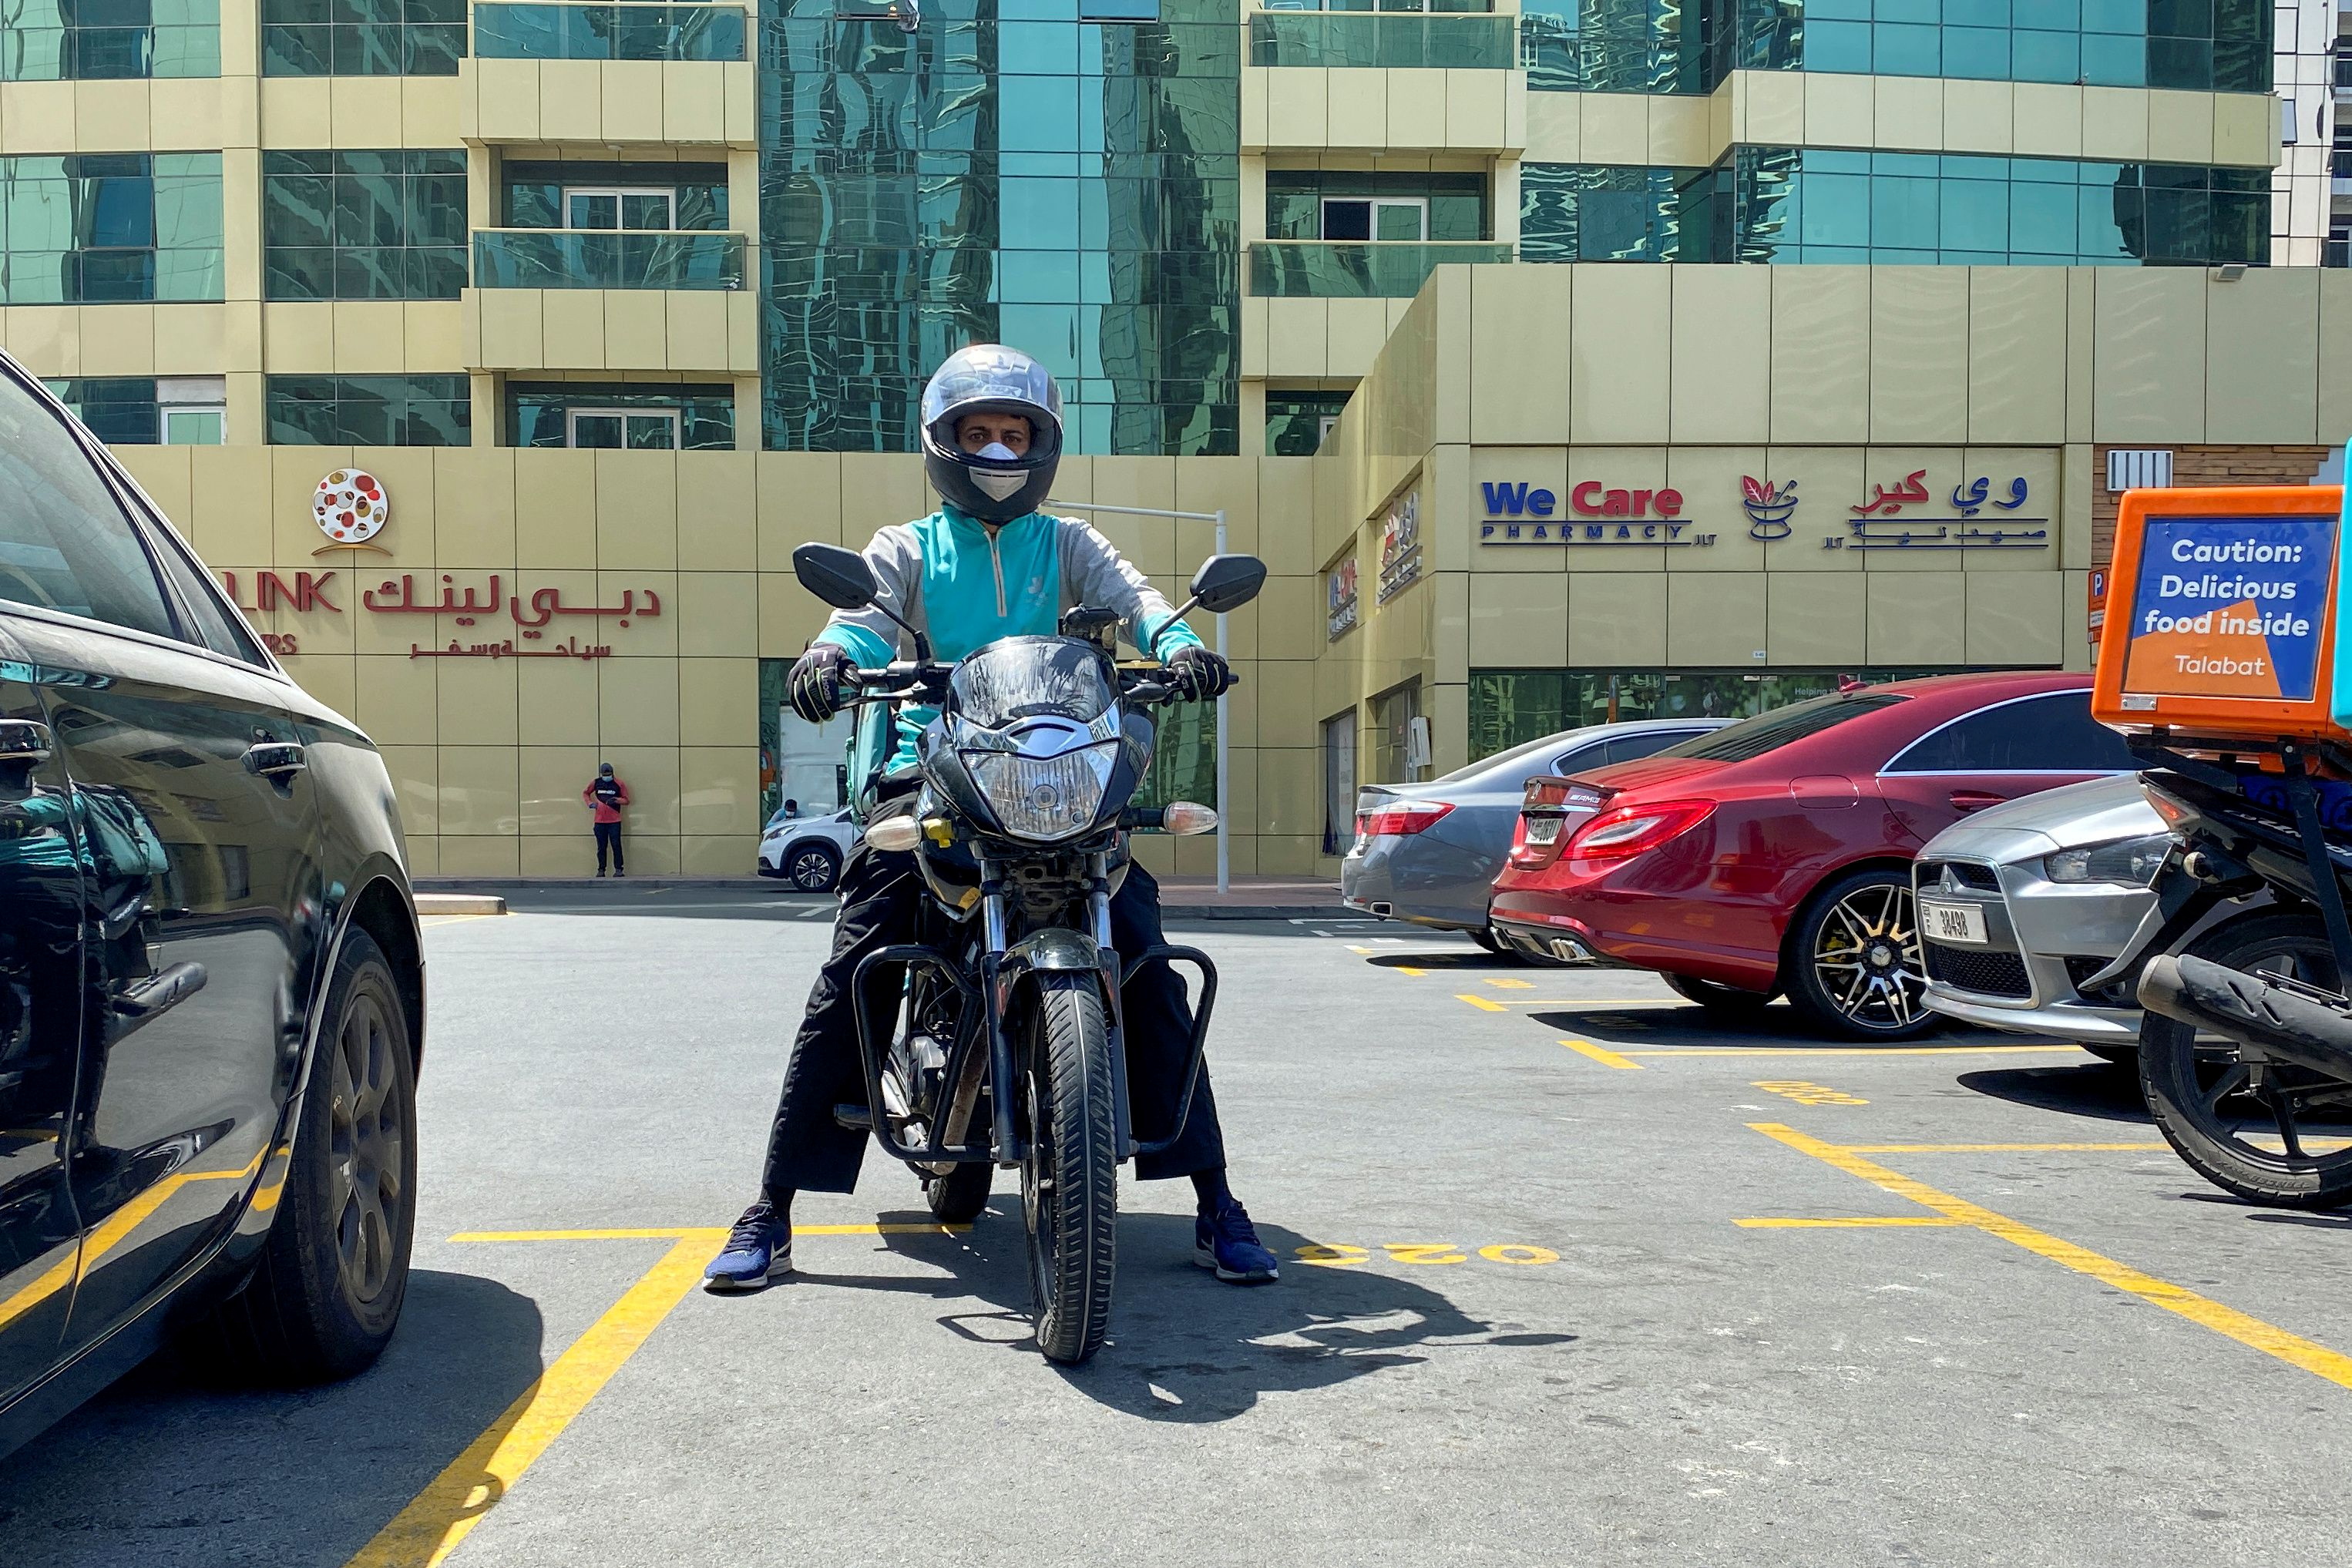 A food delivery worker rides a motorbike to deliver meal orders, following the outbreak of the coronavirus disease (COVID-19), in Dubai